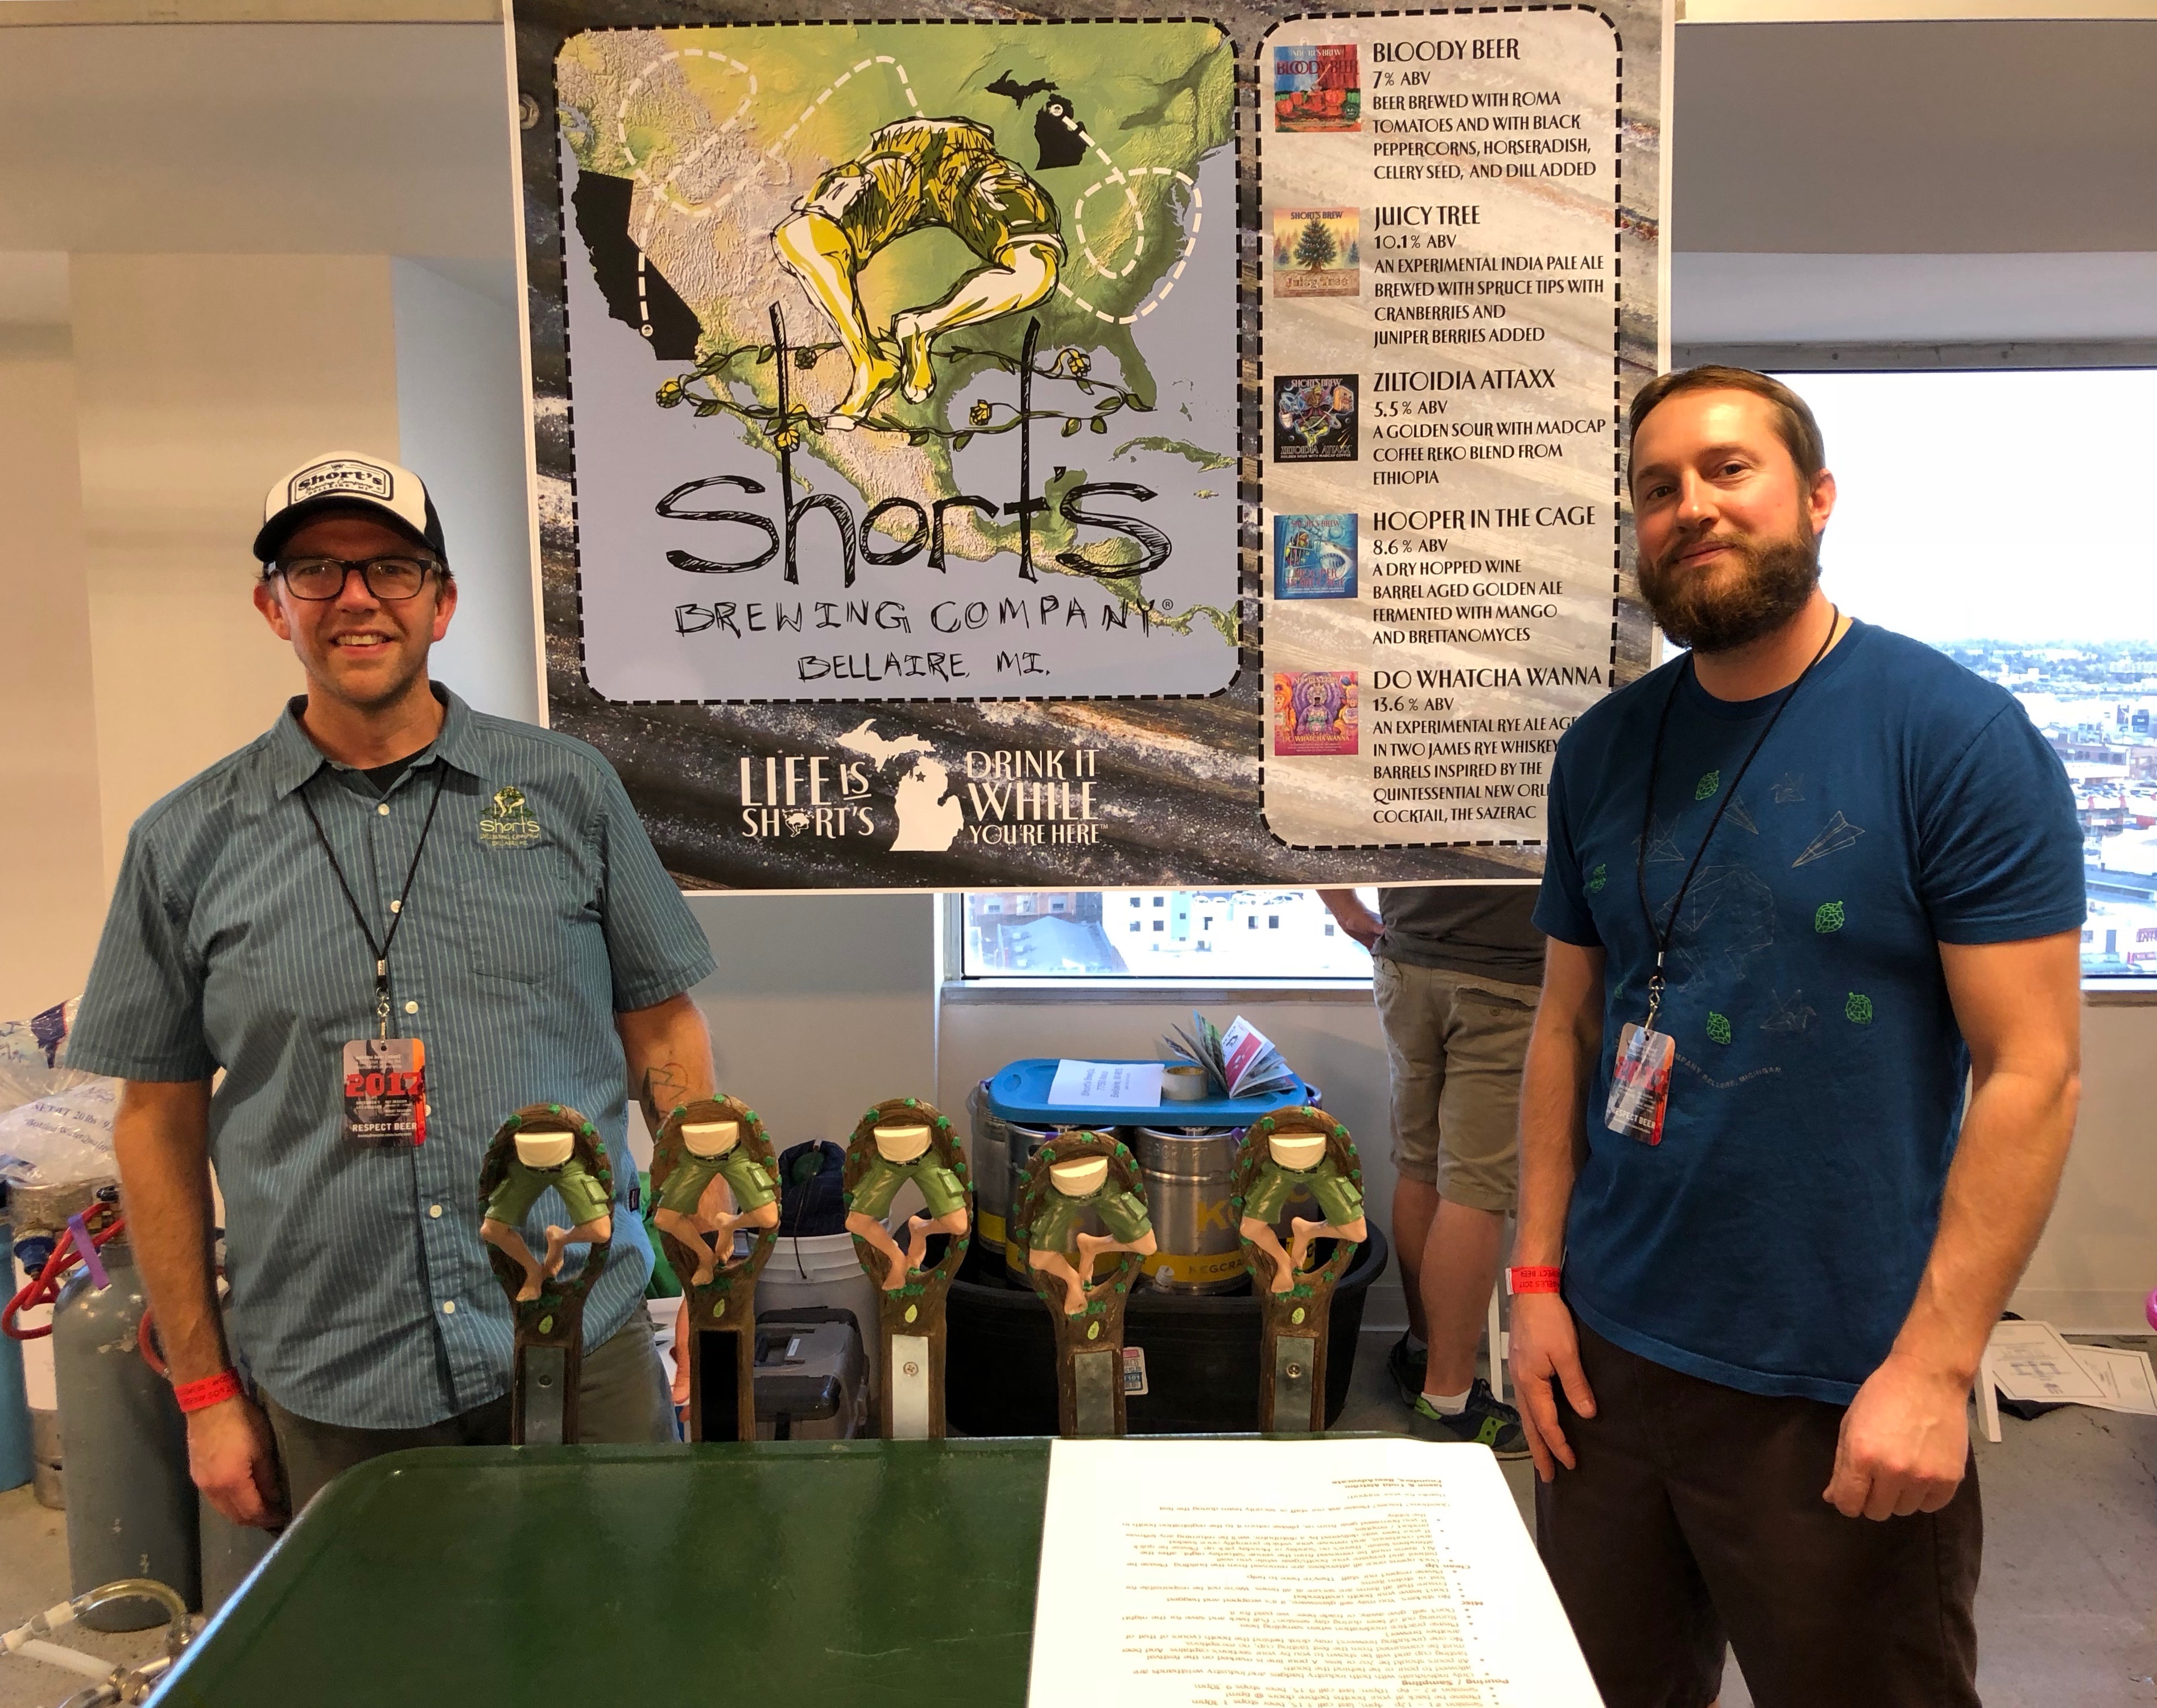 Shorts Brewing at BeerAdvocate Extreme Beer Fest in Los Angeles.